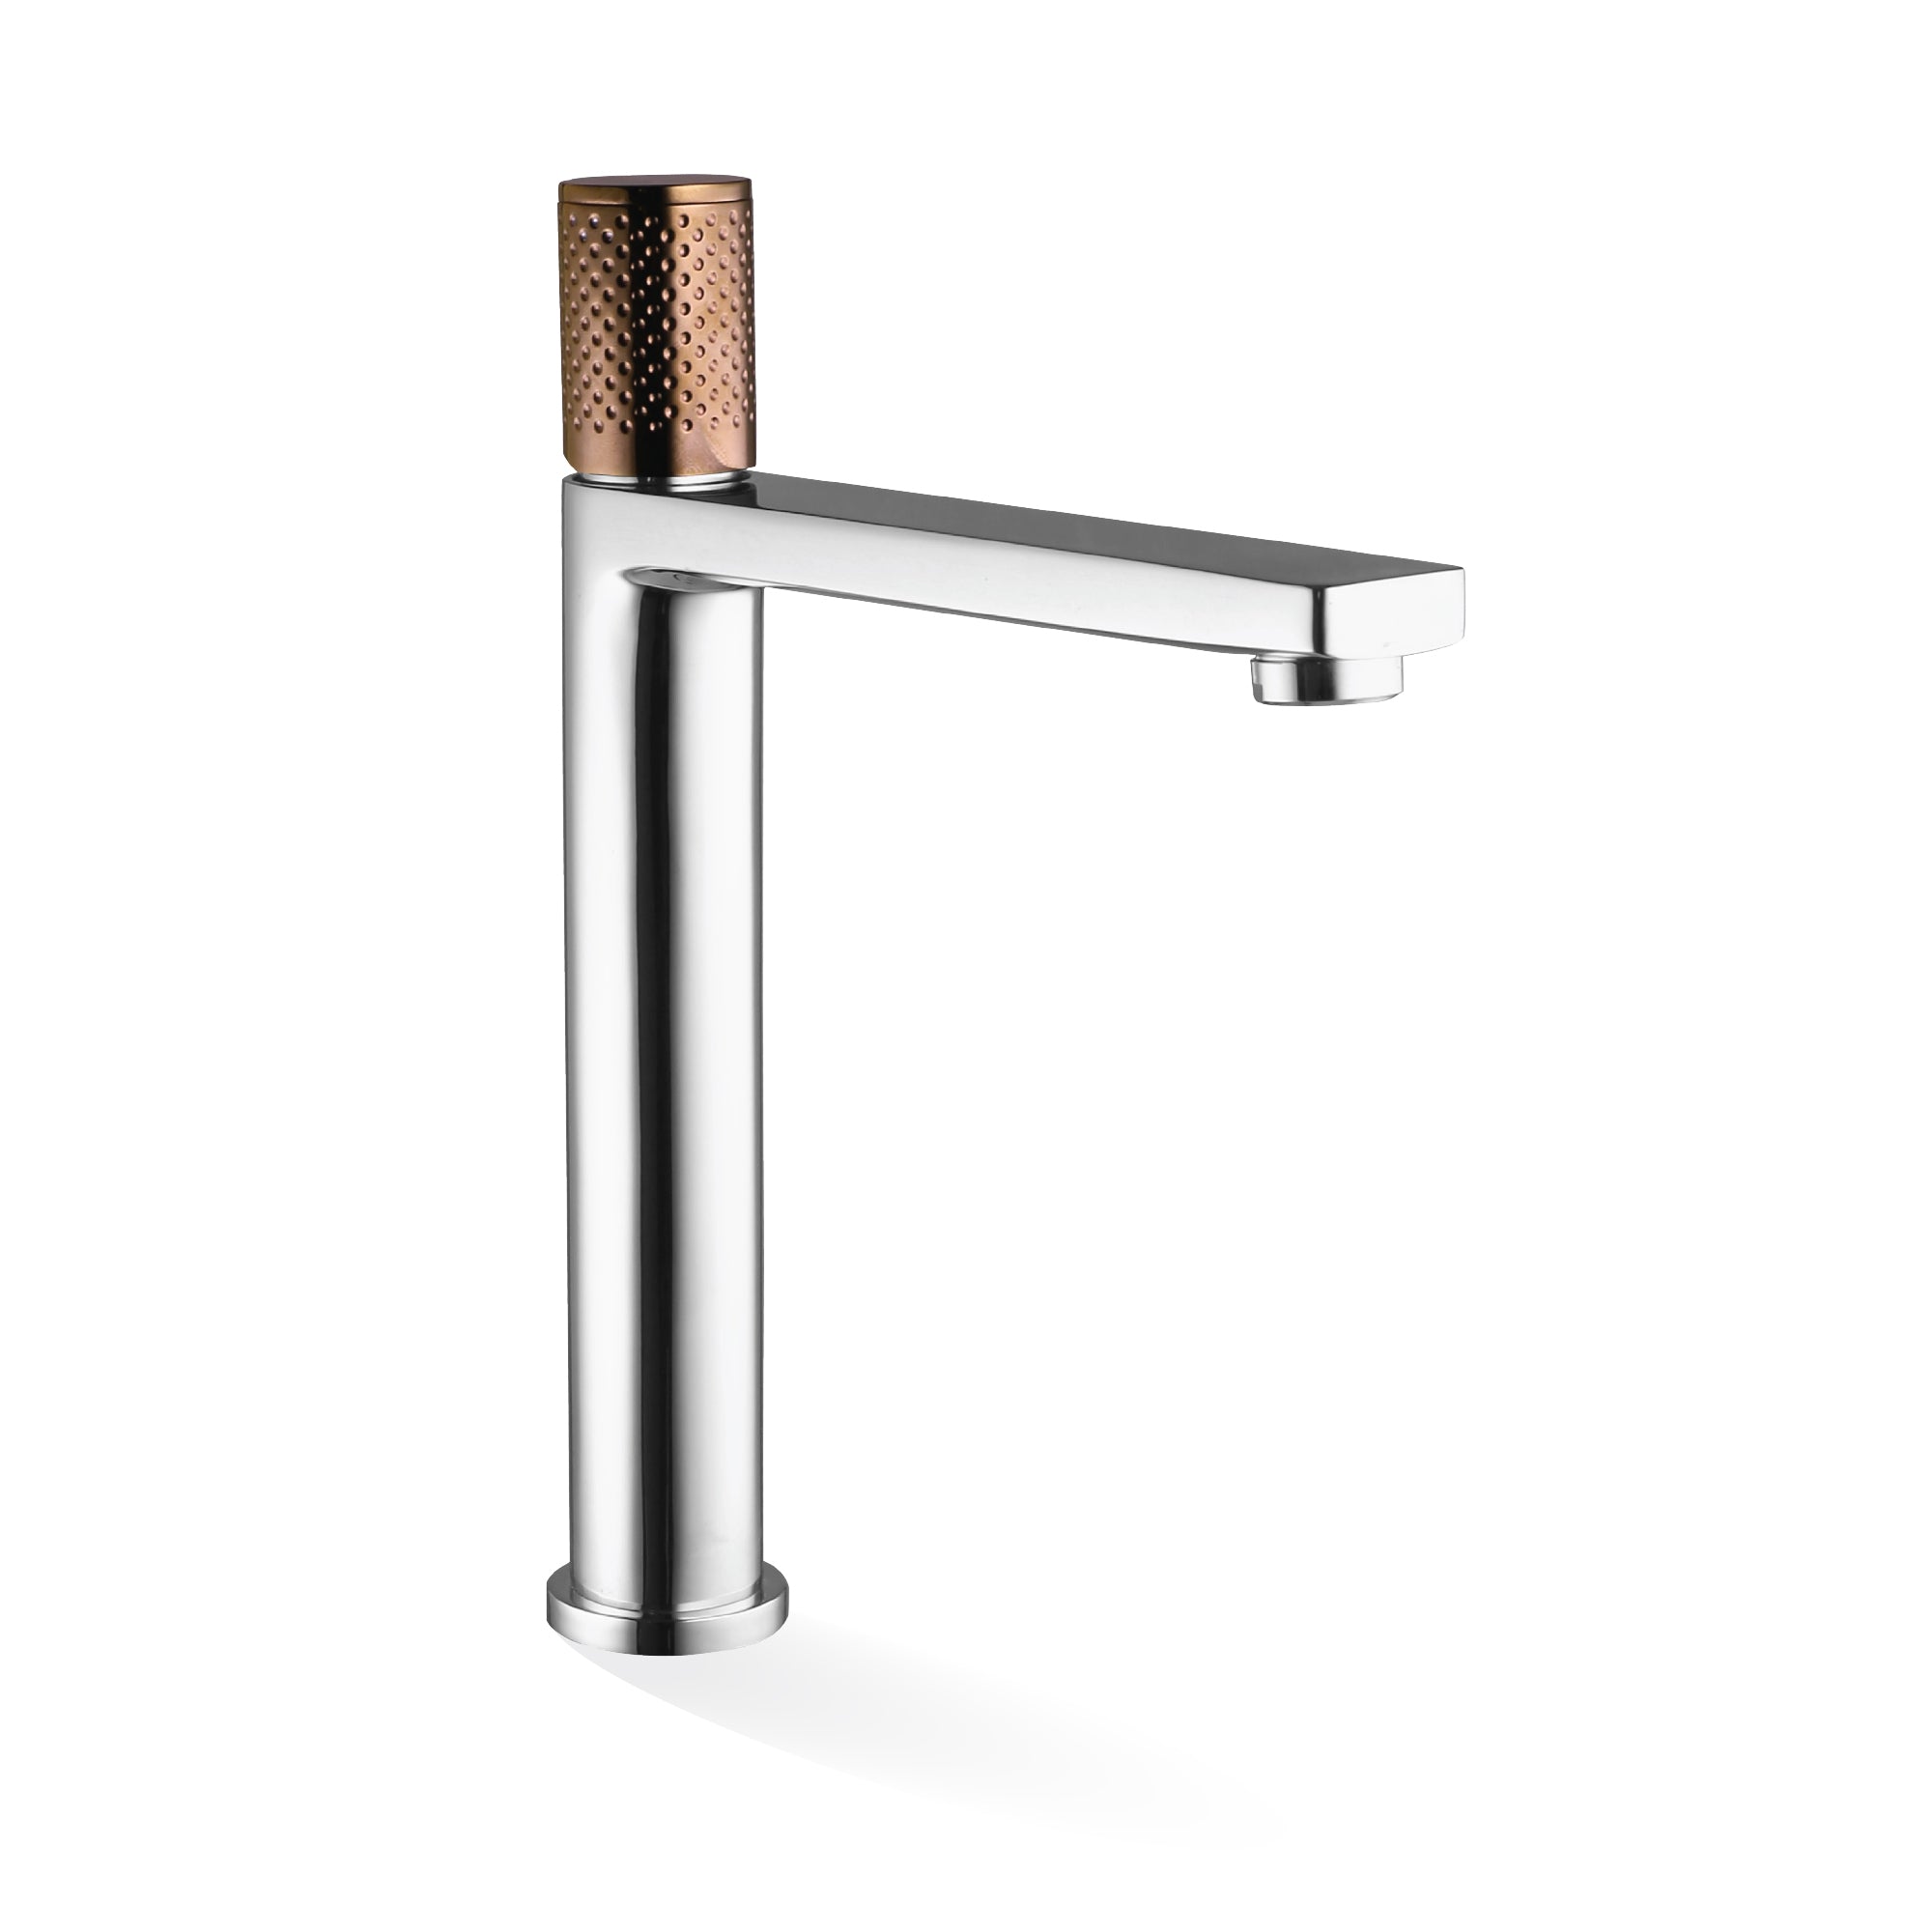 LINKWARE GABE HIGH RISE MIXER CHROME AND ROSE GOLD